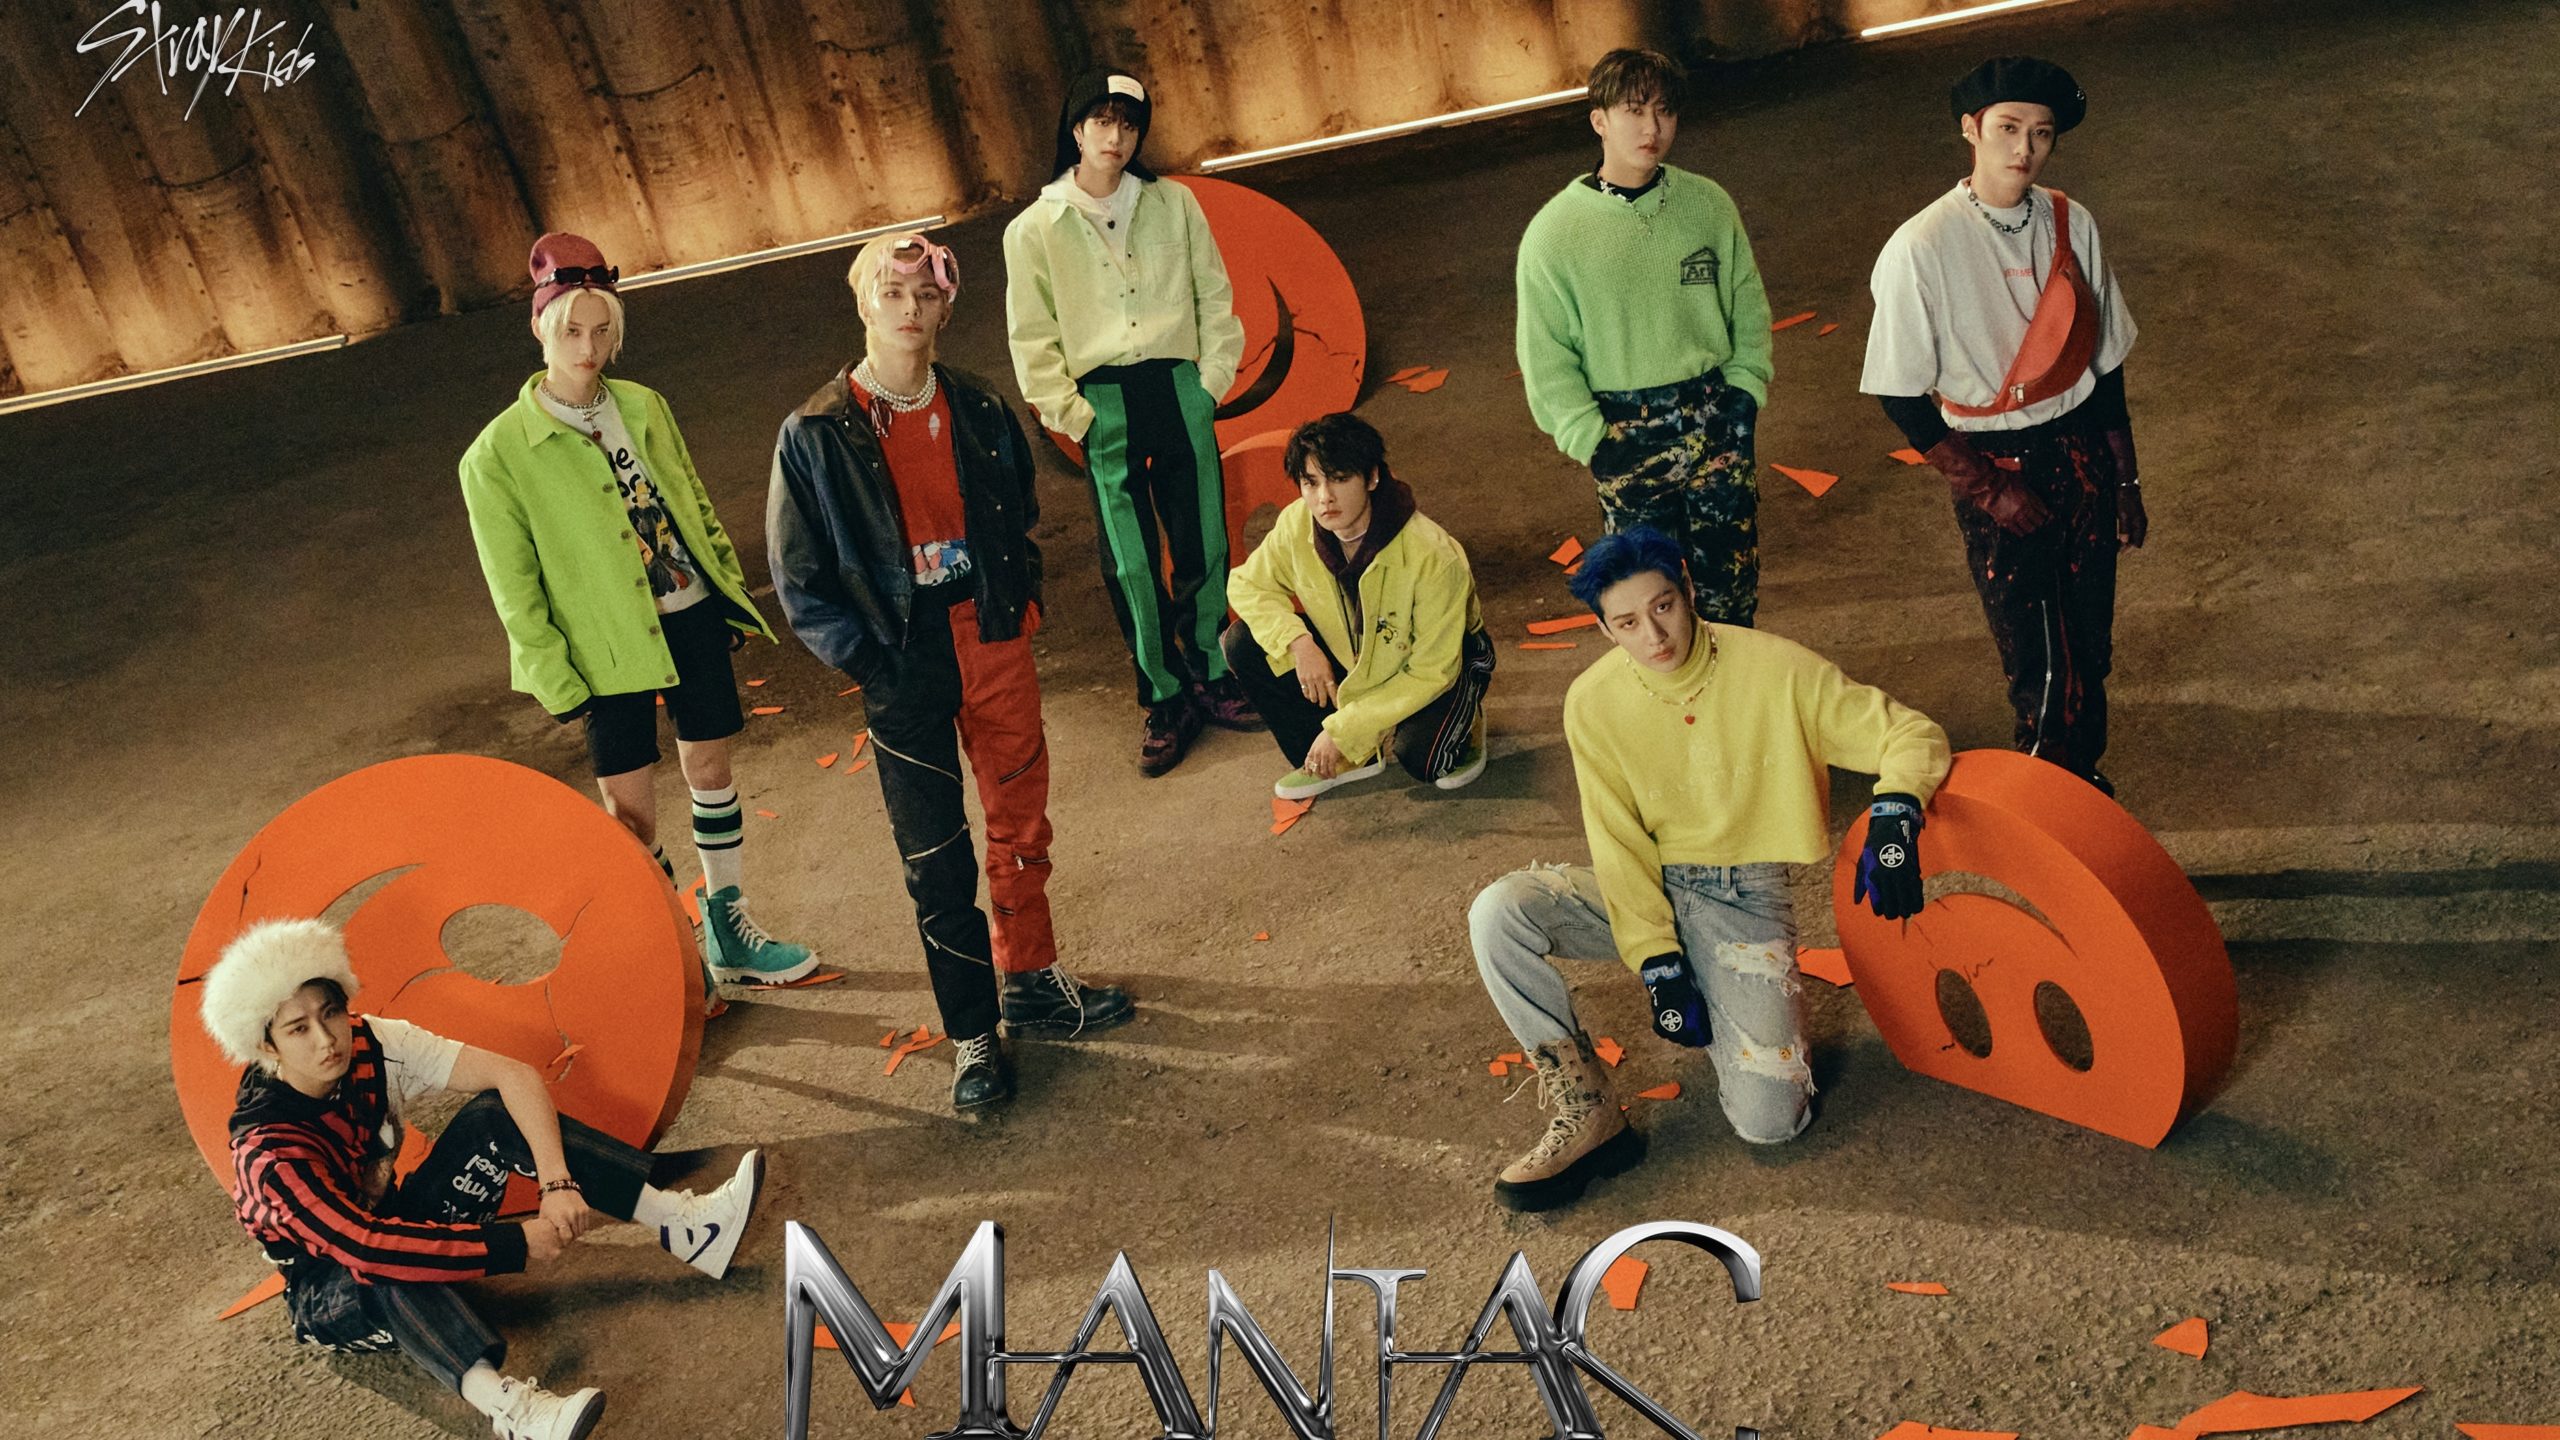 Stray Kids to Debut “Maniac” On The Late Show With Stephen Colbert